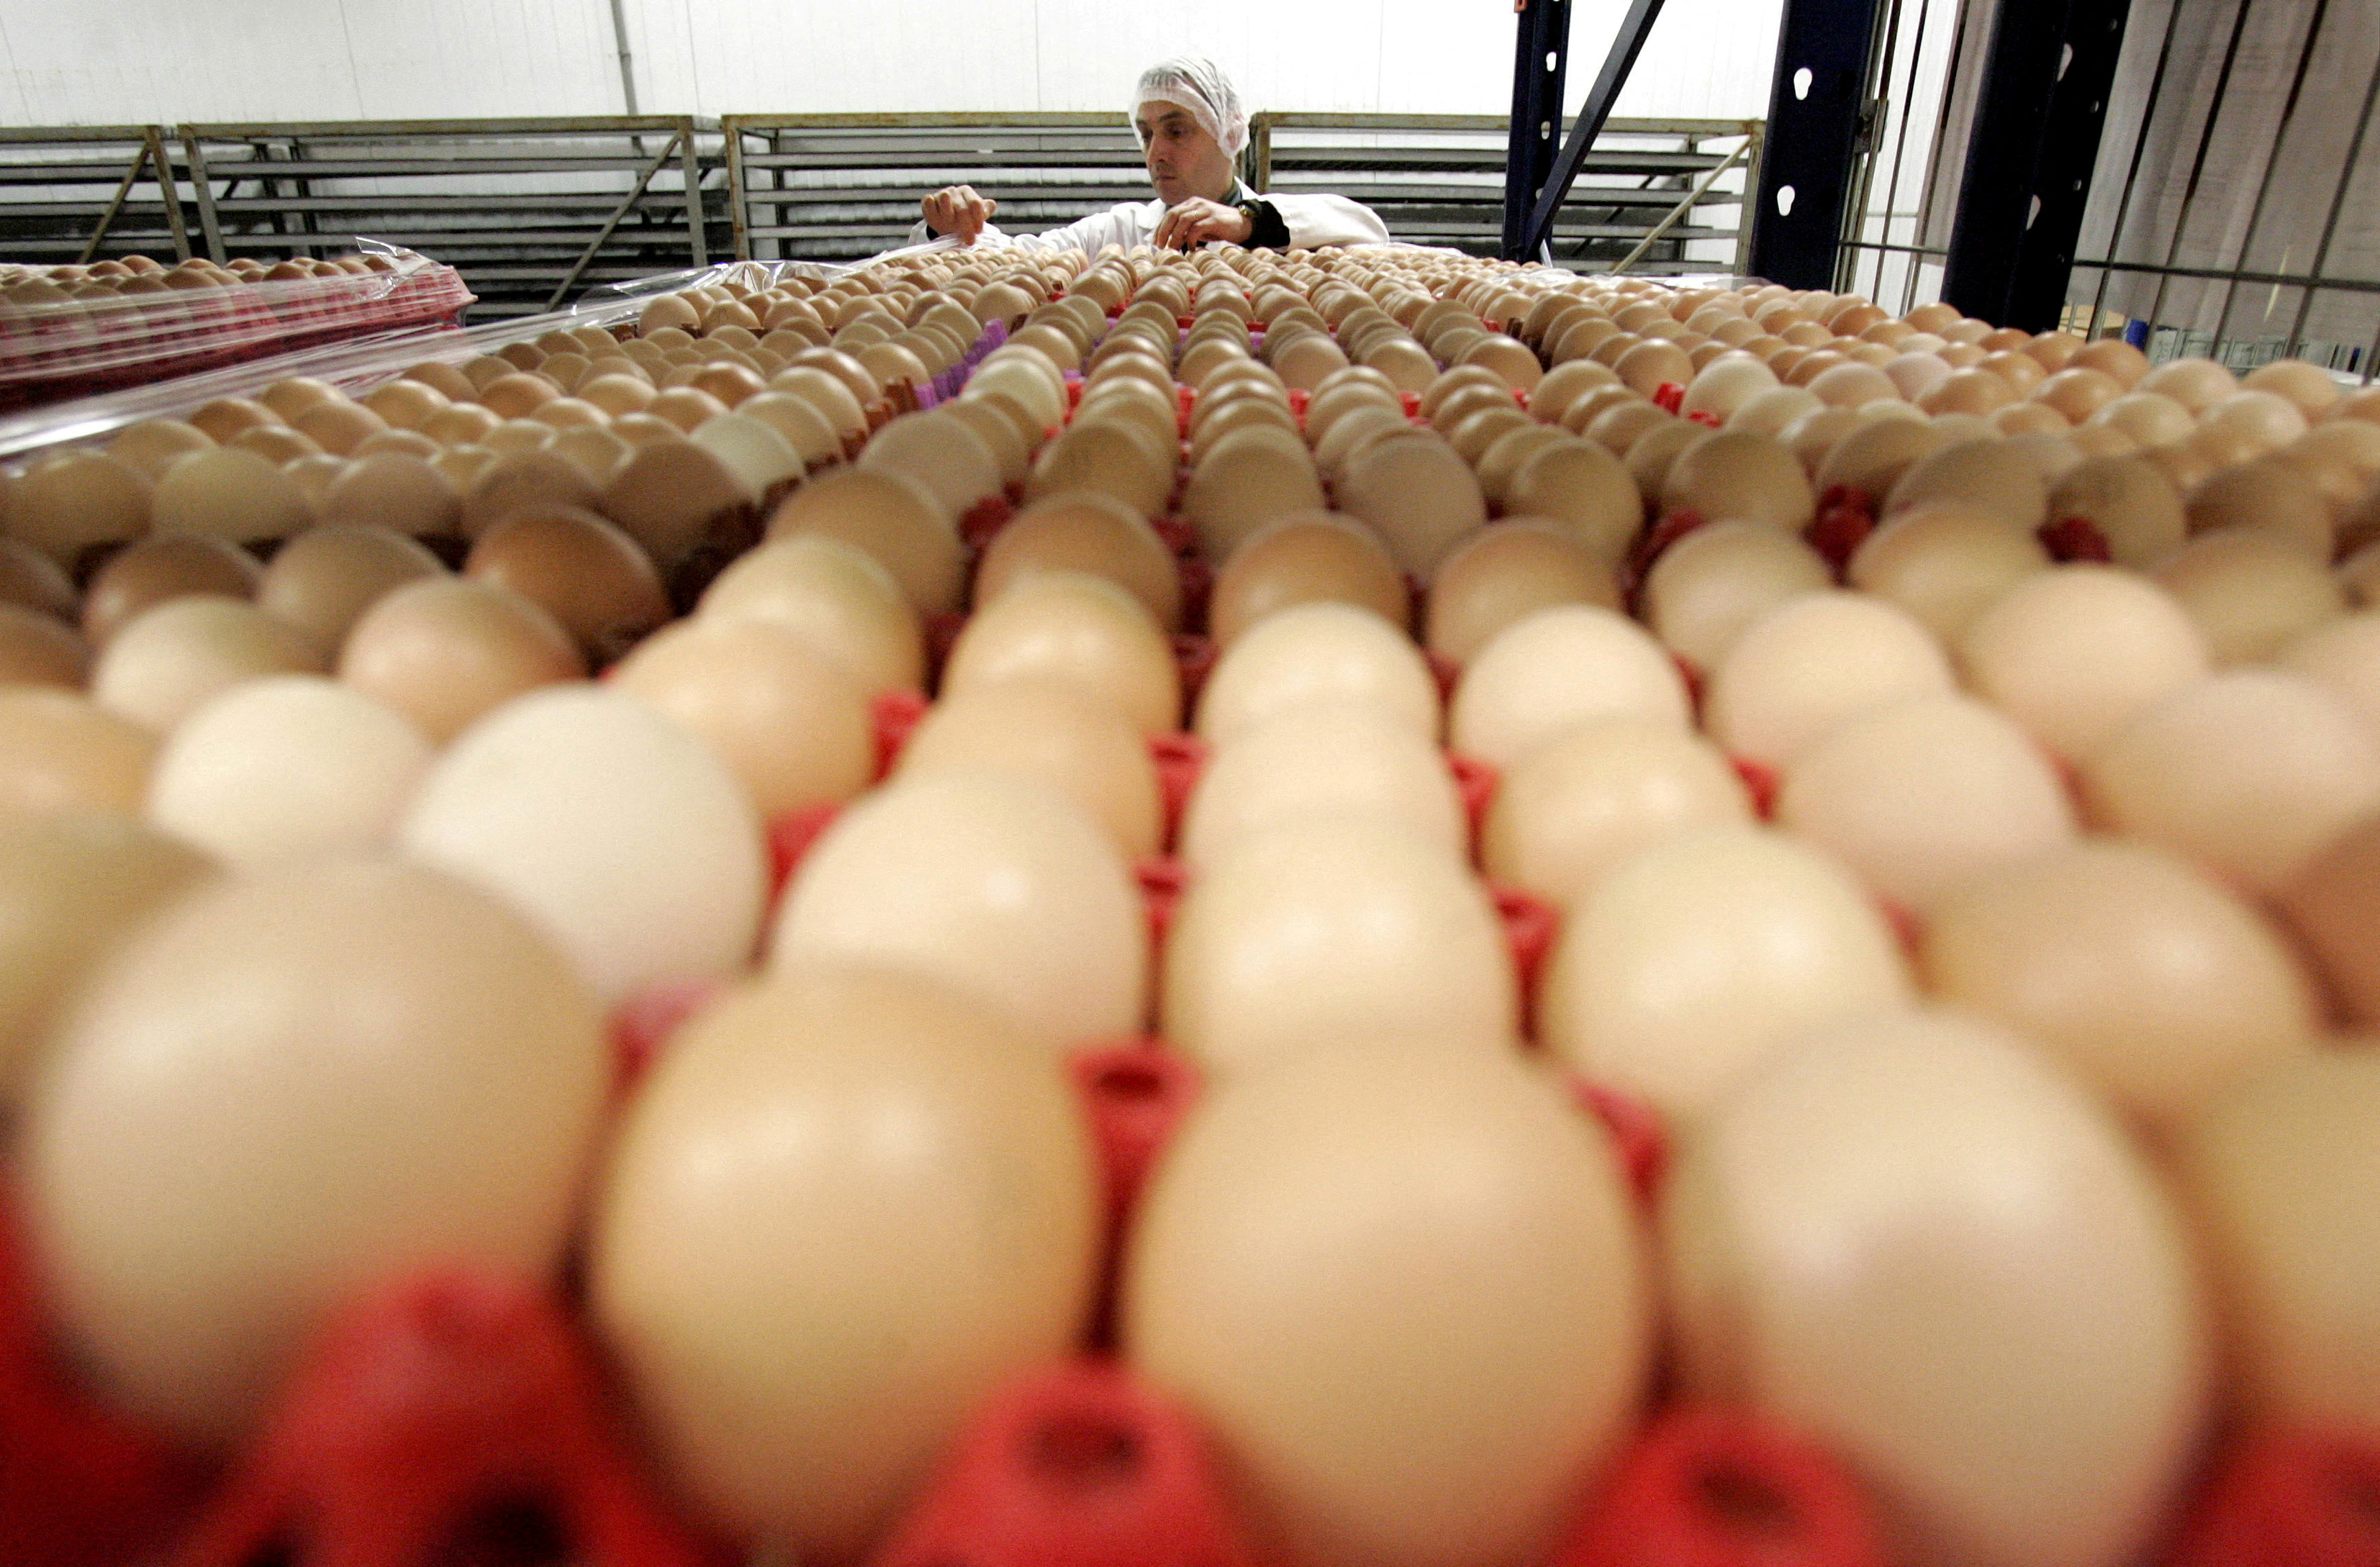 An employee of a poultry farm examines eggs in Volnay, western France February 23, 2006. [Further ca..